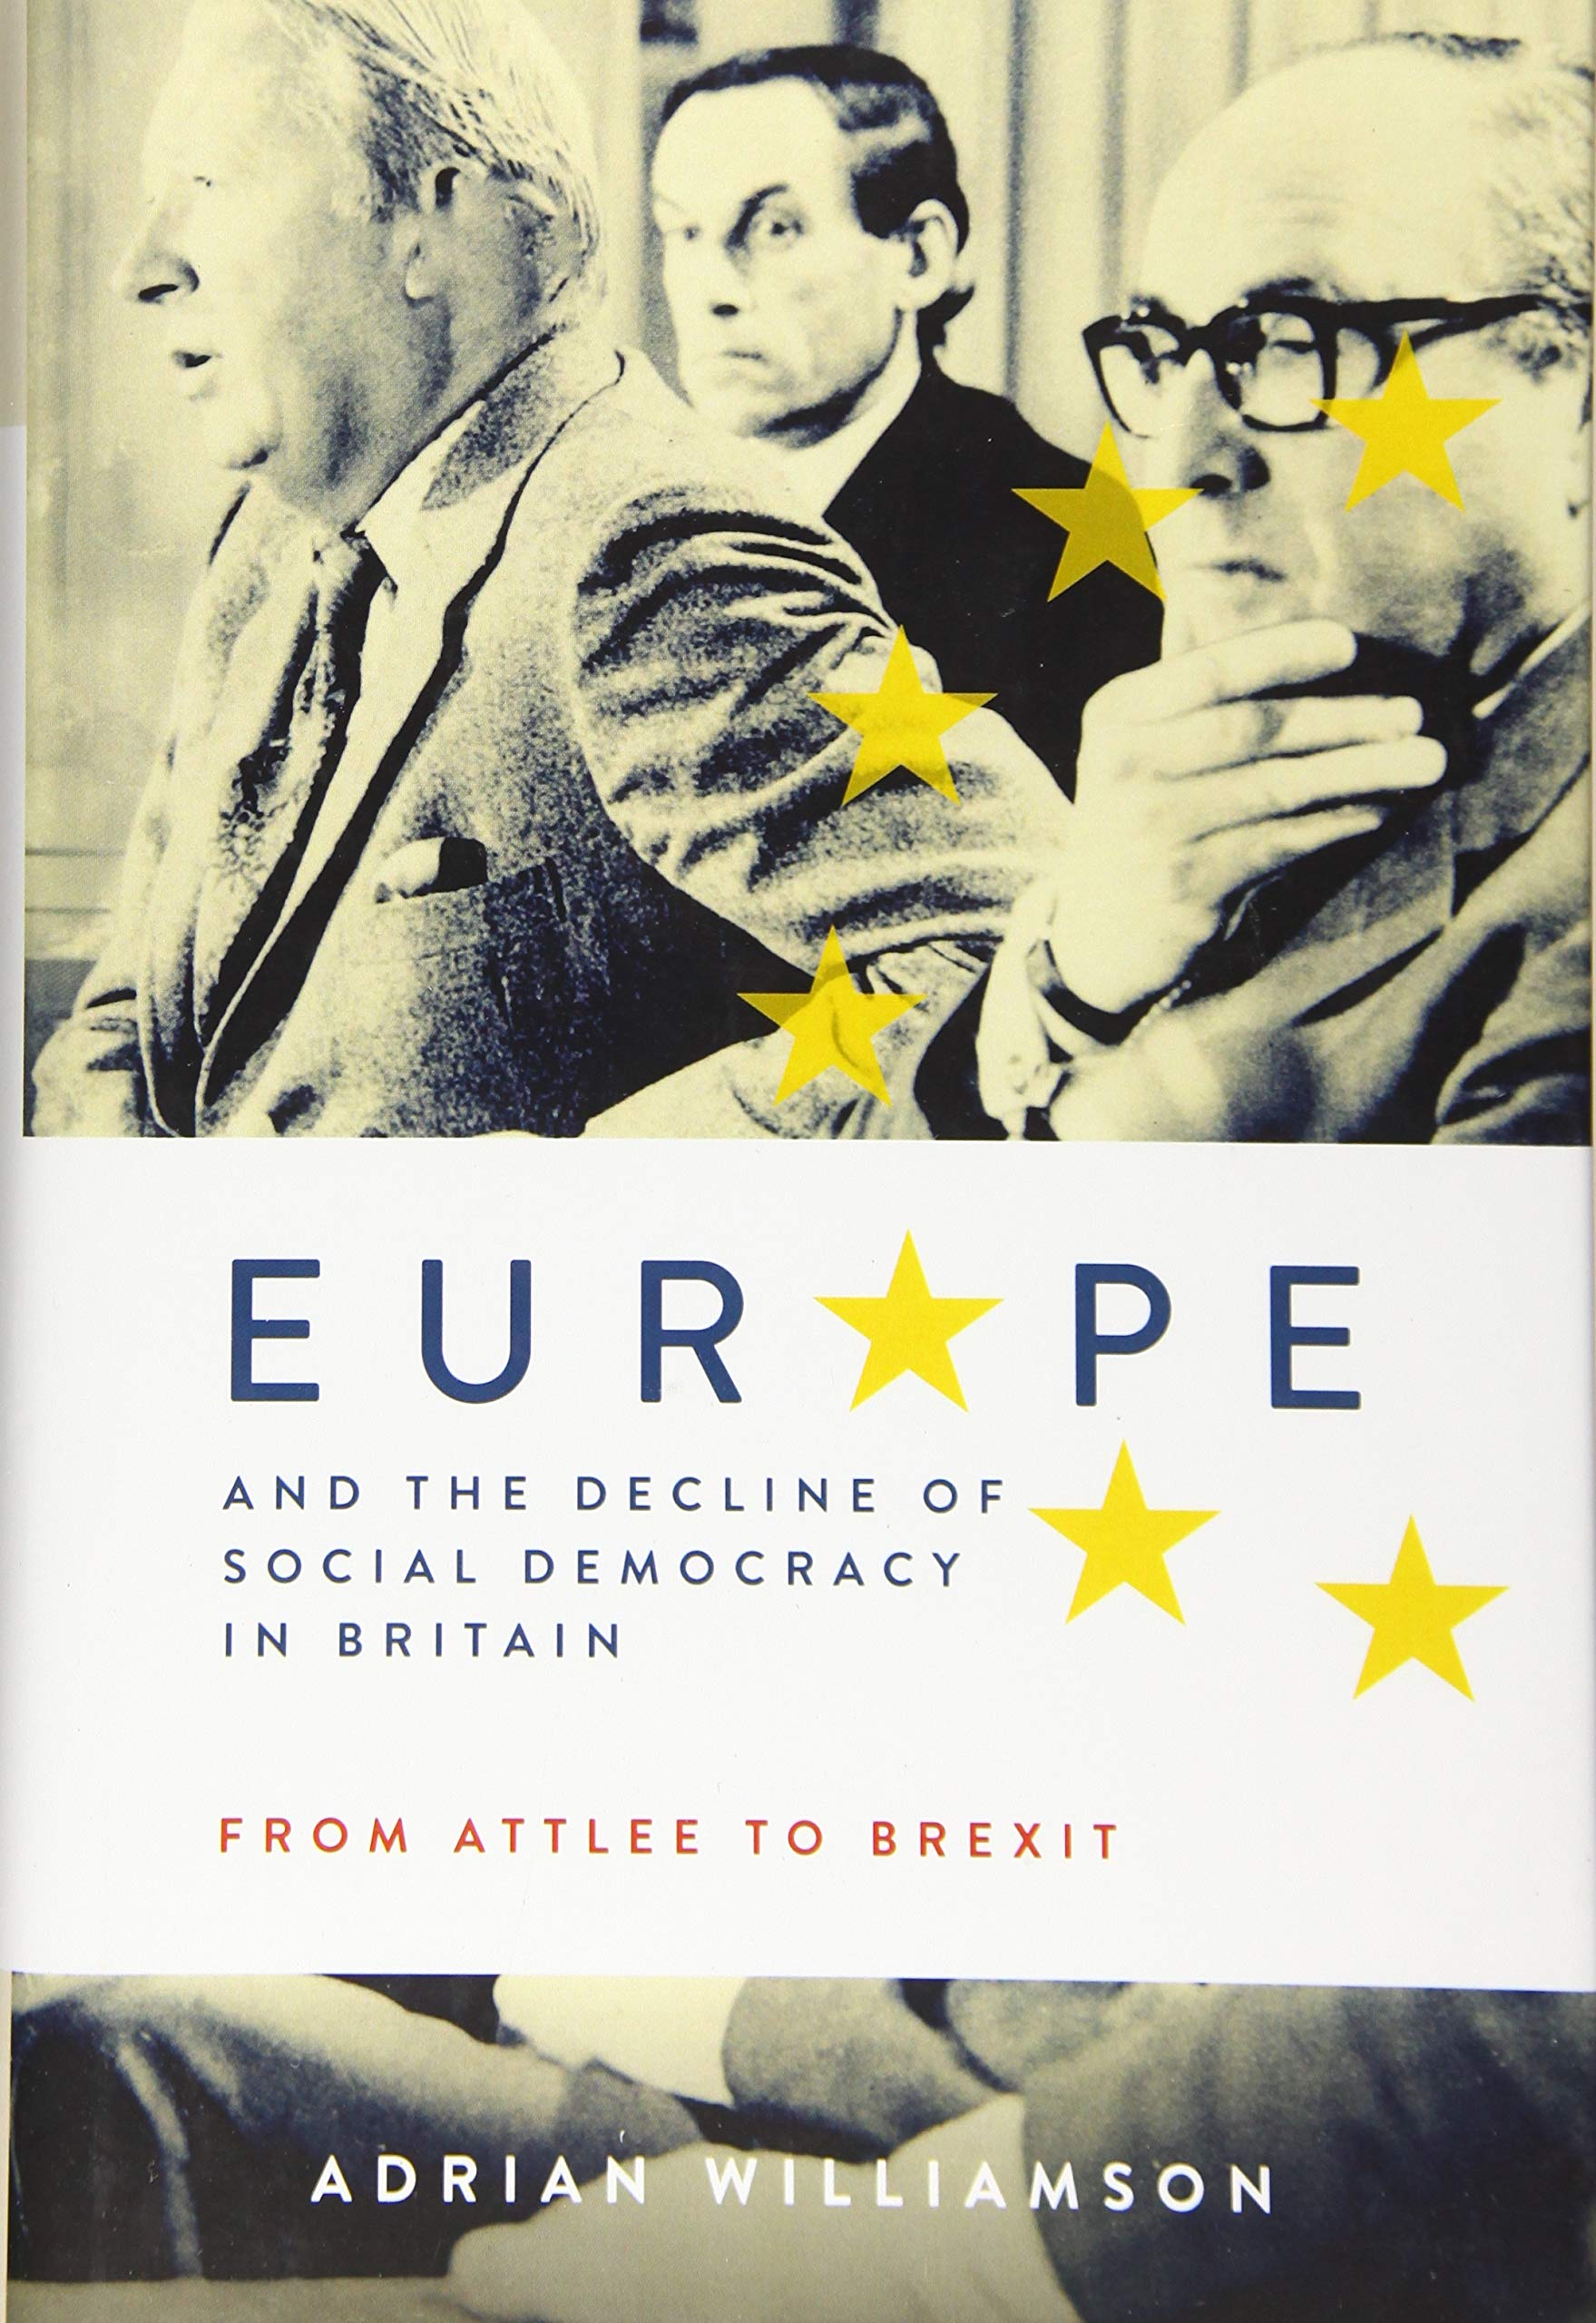 Adrian Williamson: Europe and the Decline of Social Democracy in Britain (2019, Boydell & Brewer, Incorporated)